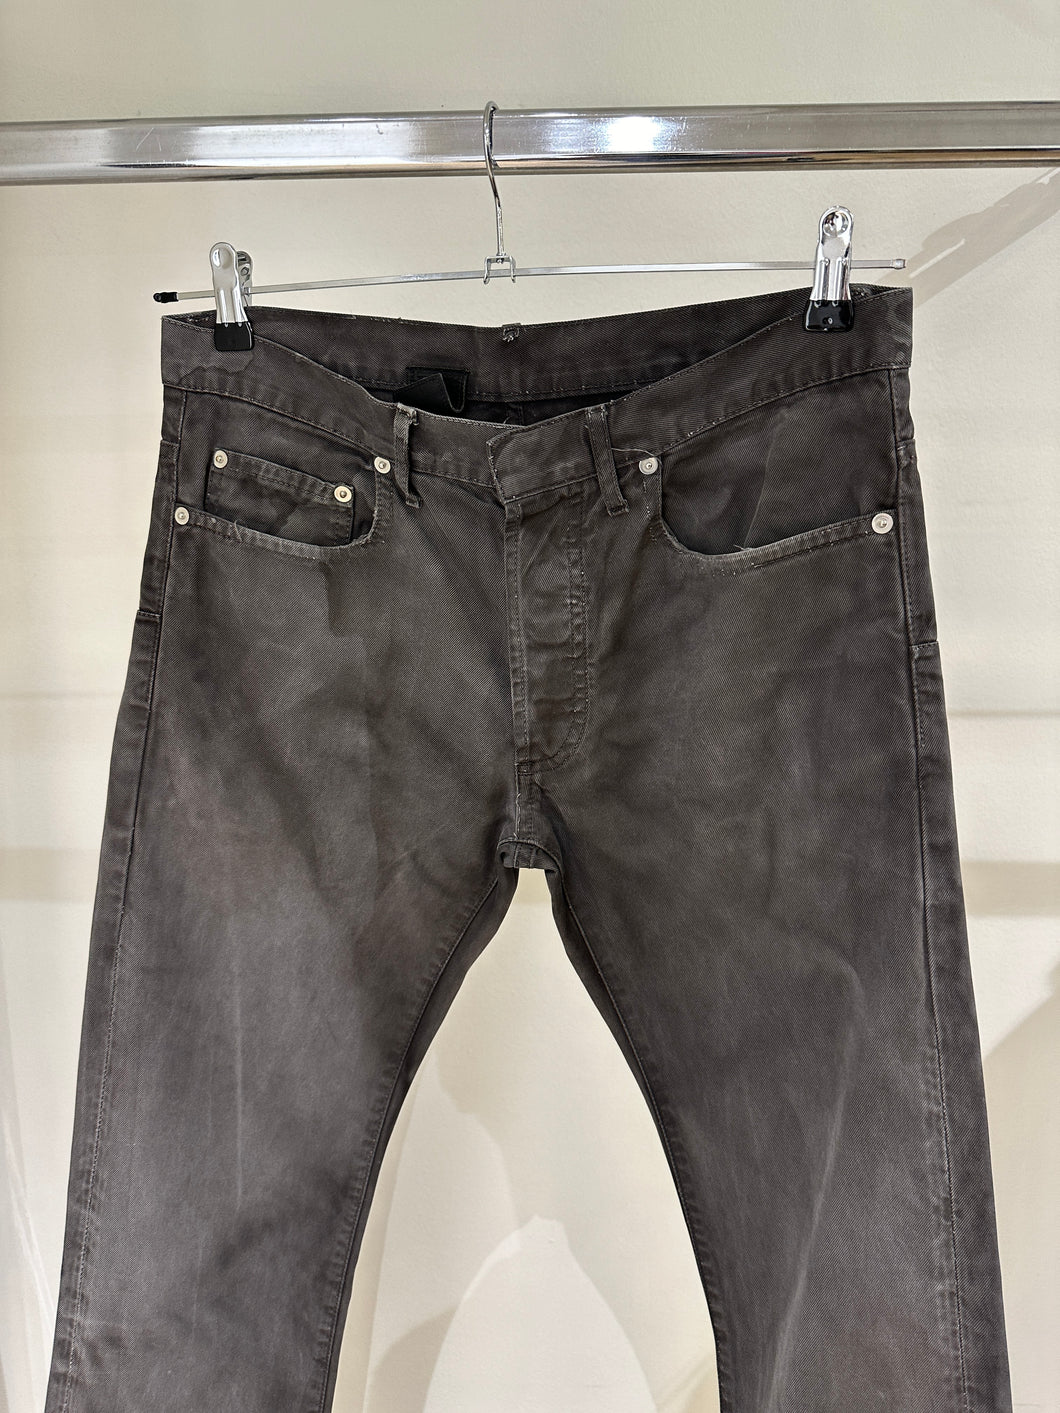 2000s Dior by Hedi Slimane stone wash jeans